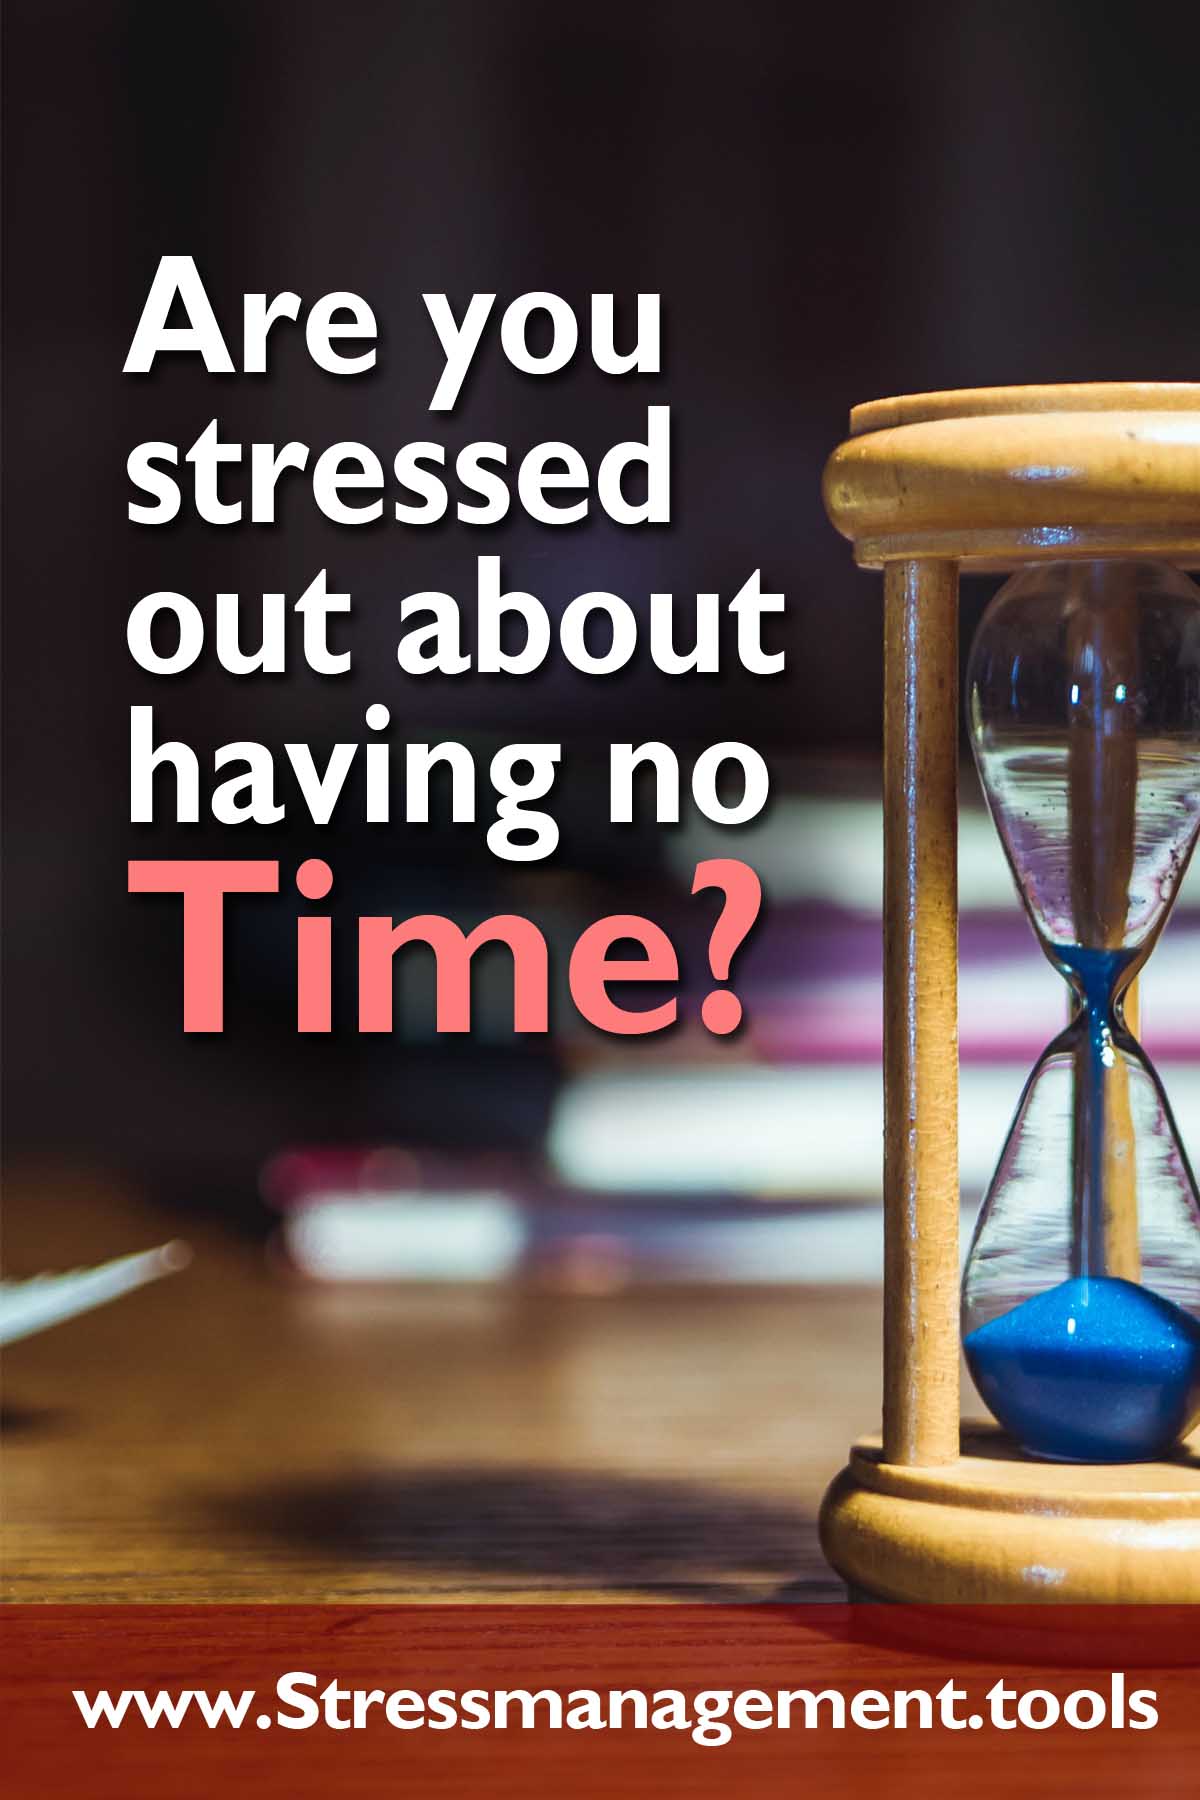 Are You Stressed Out about Having no Time?